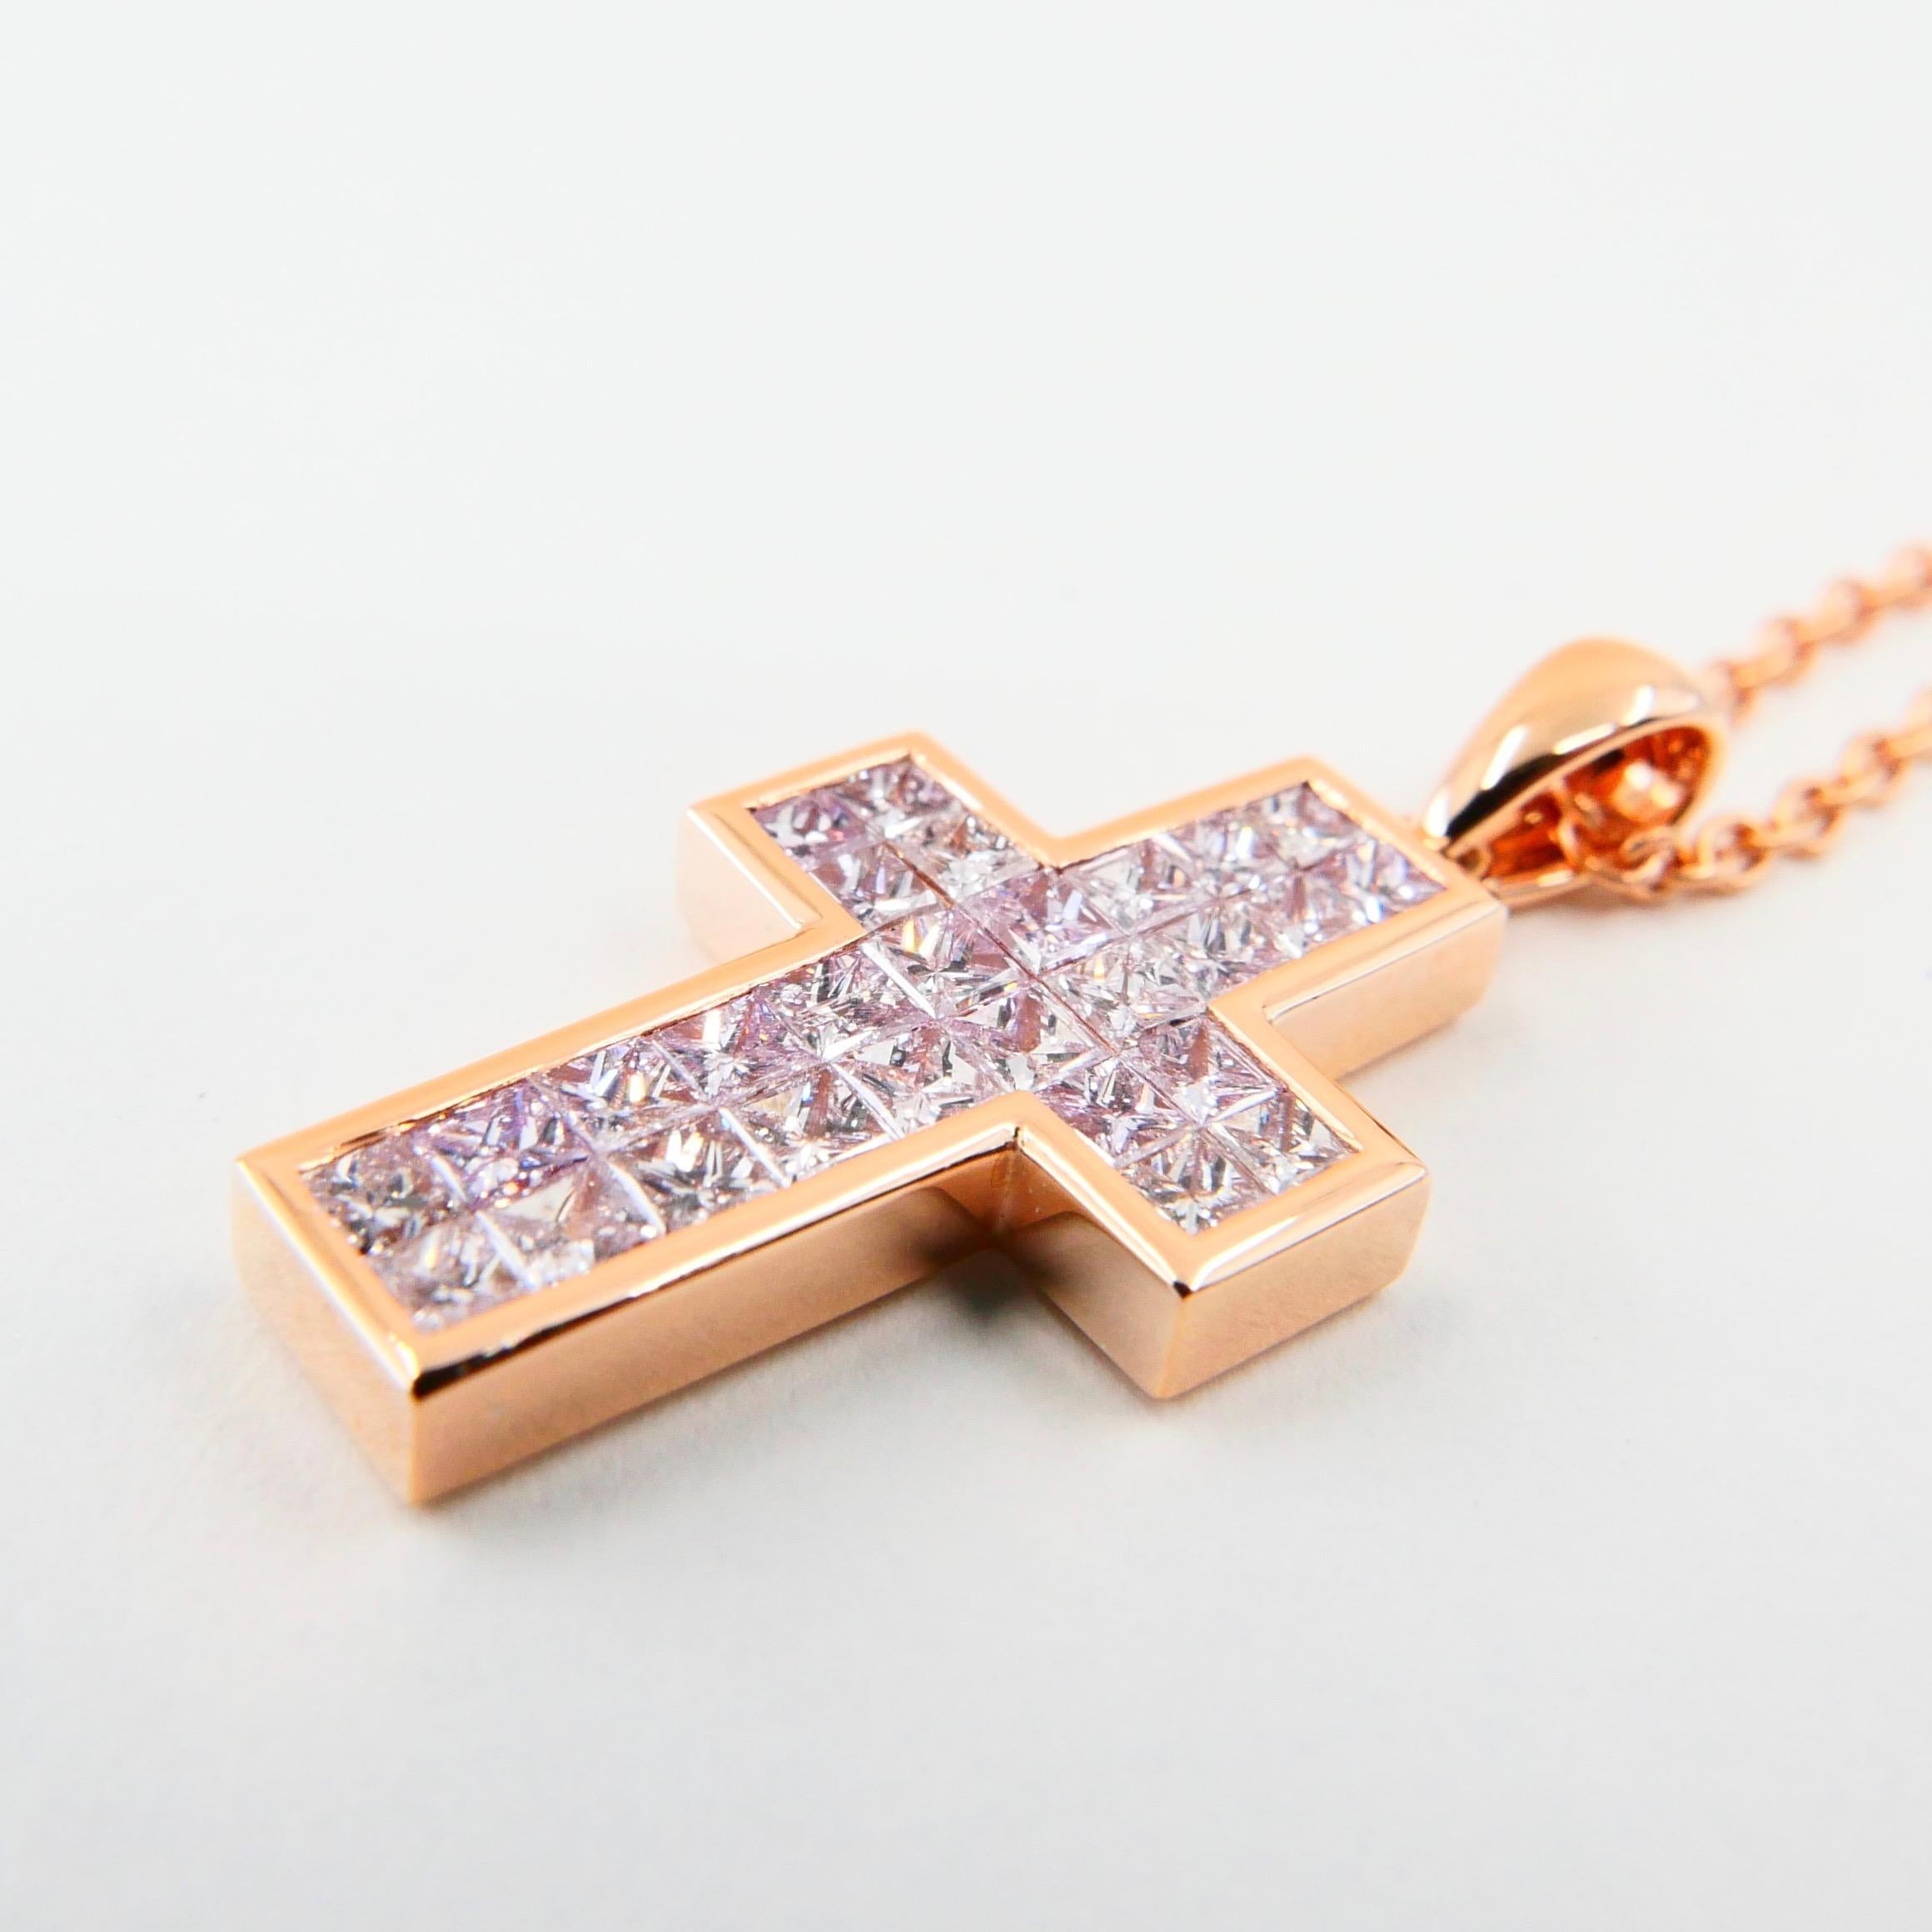 Women's 1.11 CTW Natural Light Baby Pink Diamond Cross Pendant Necklace. 18K Rose Gold. For Sale